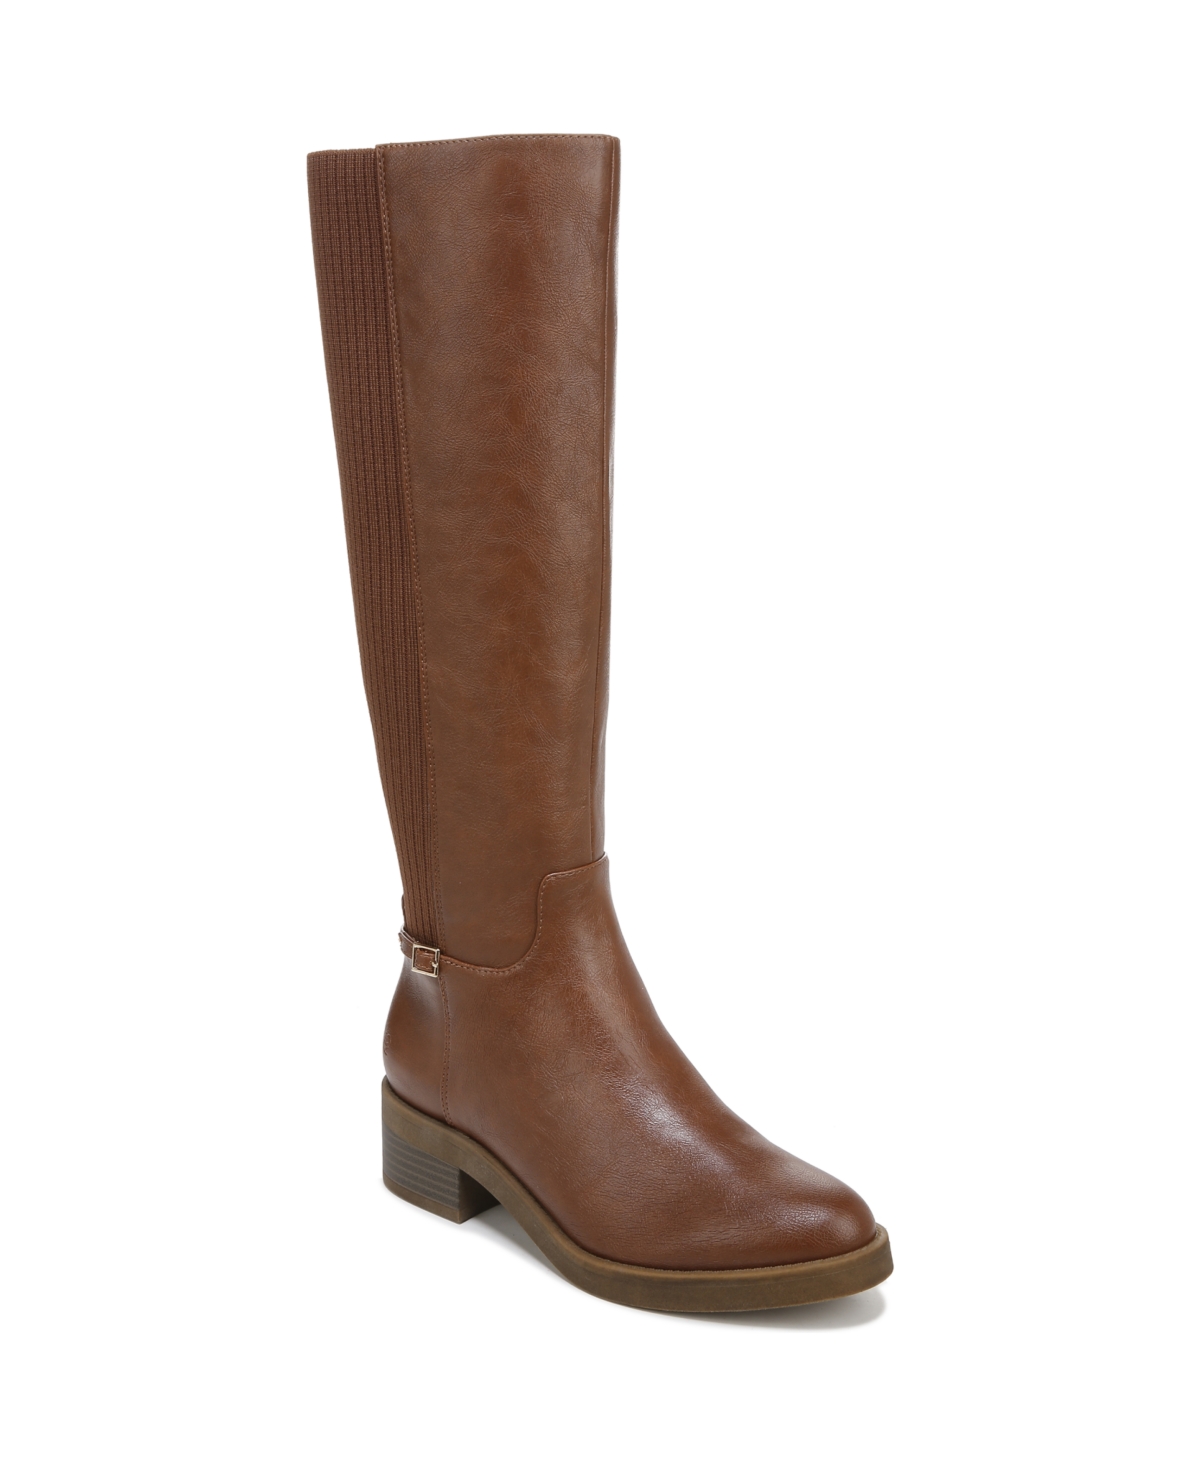 Bristol Knee High Boots - Walnut Brown Faux Leather